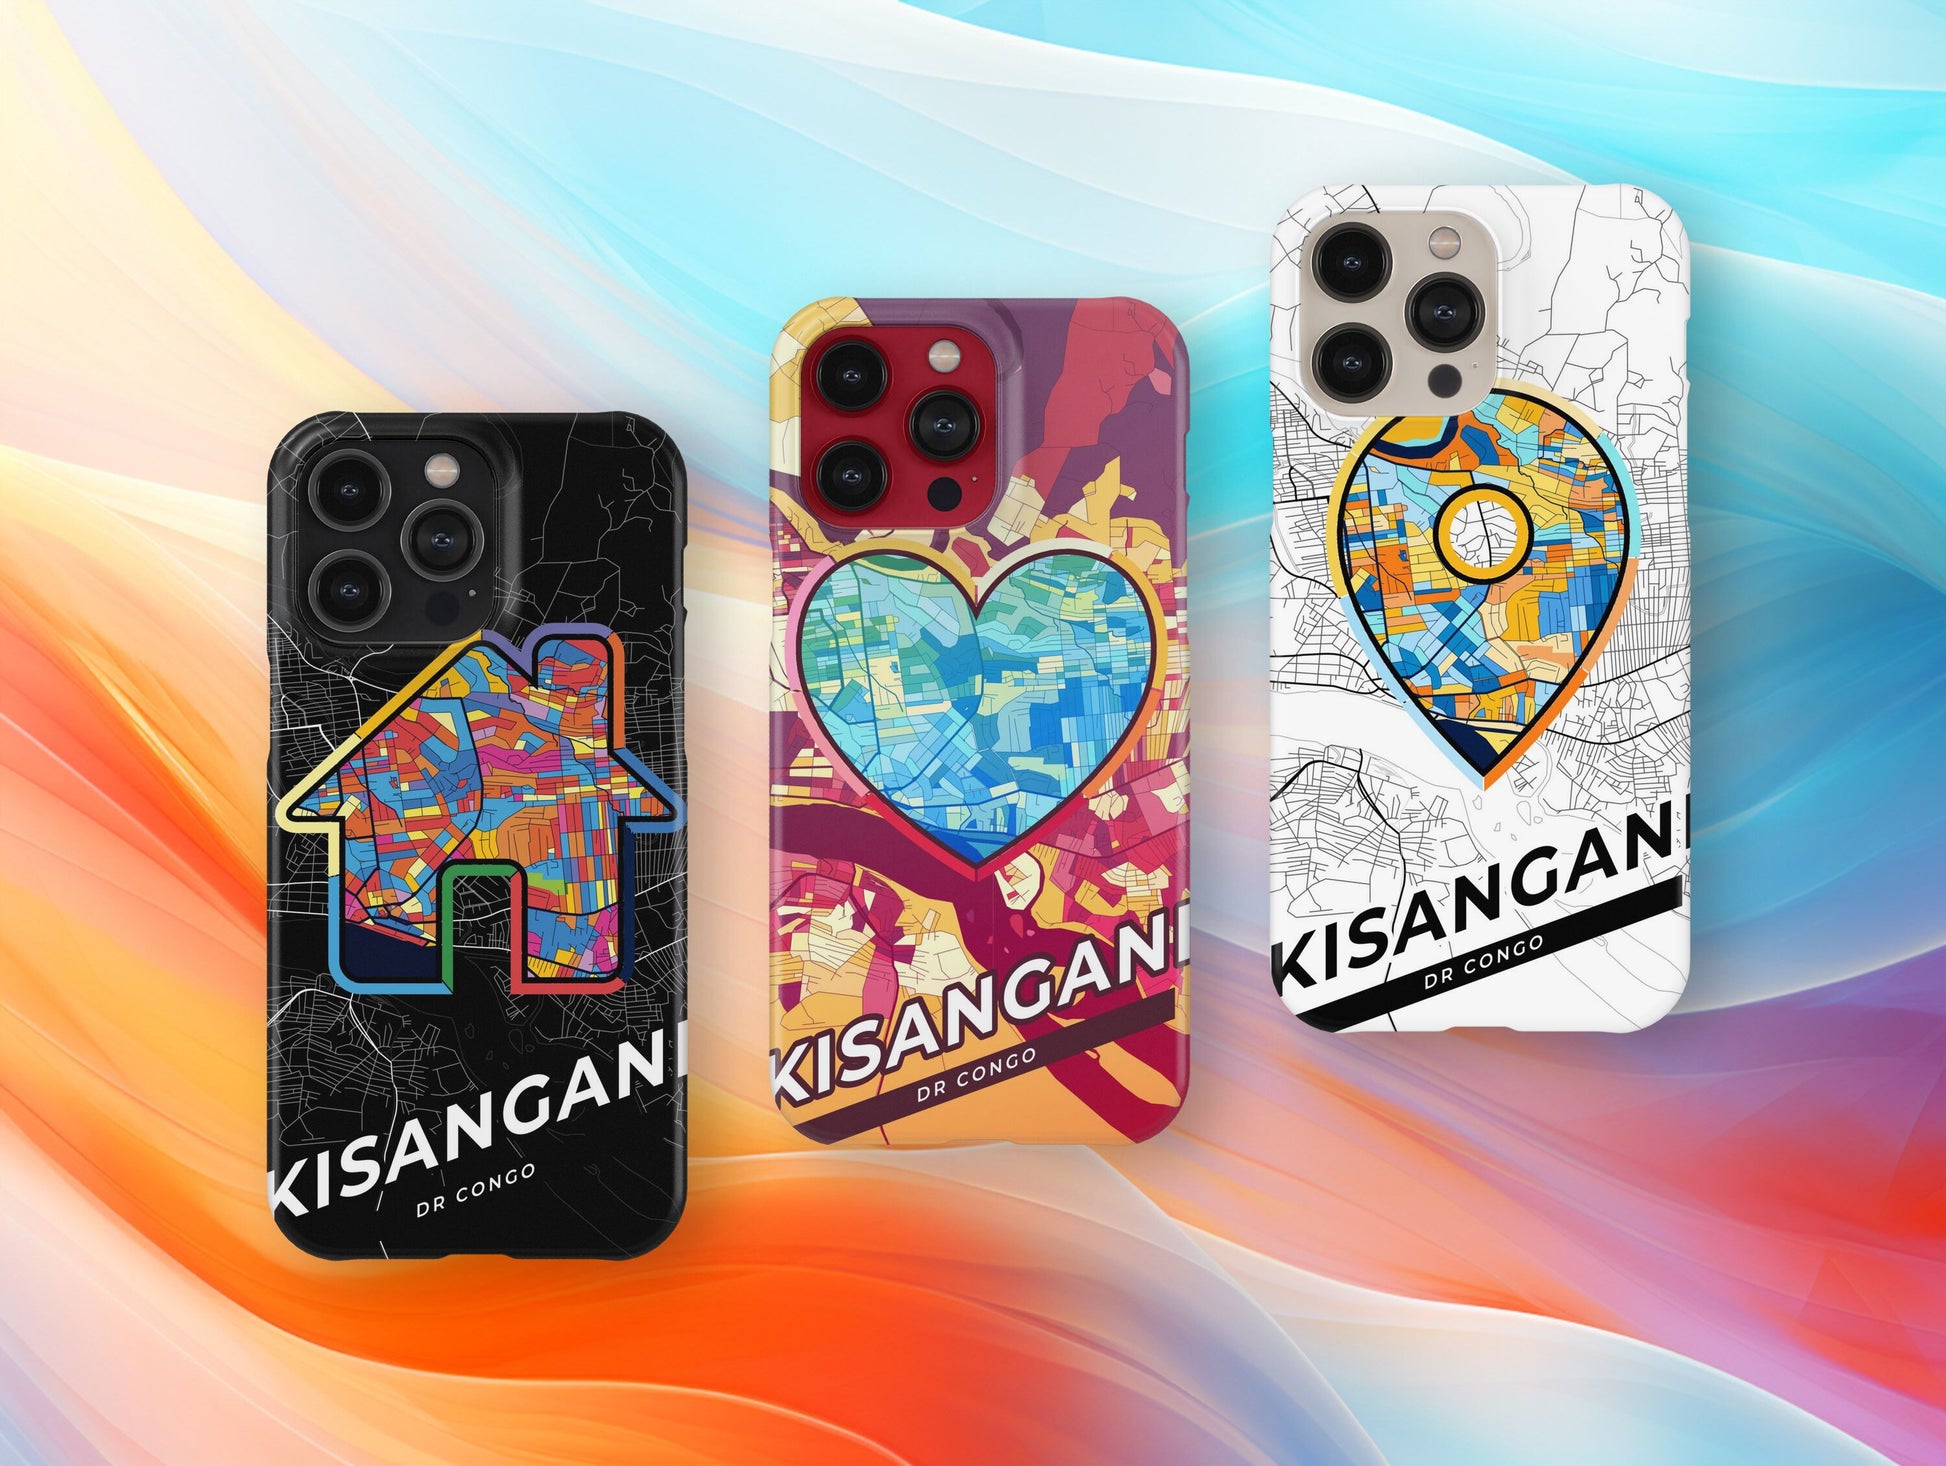 Kisangani Dr Congo slim phone case with colorful icon. Birthday, wedding or housewarming gift. Couple match cases.